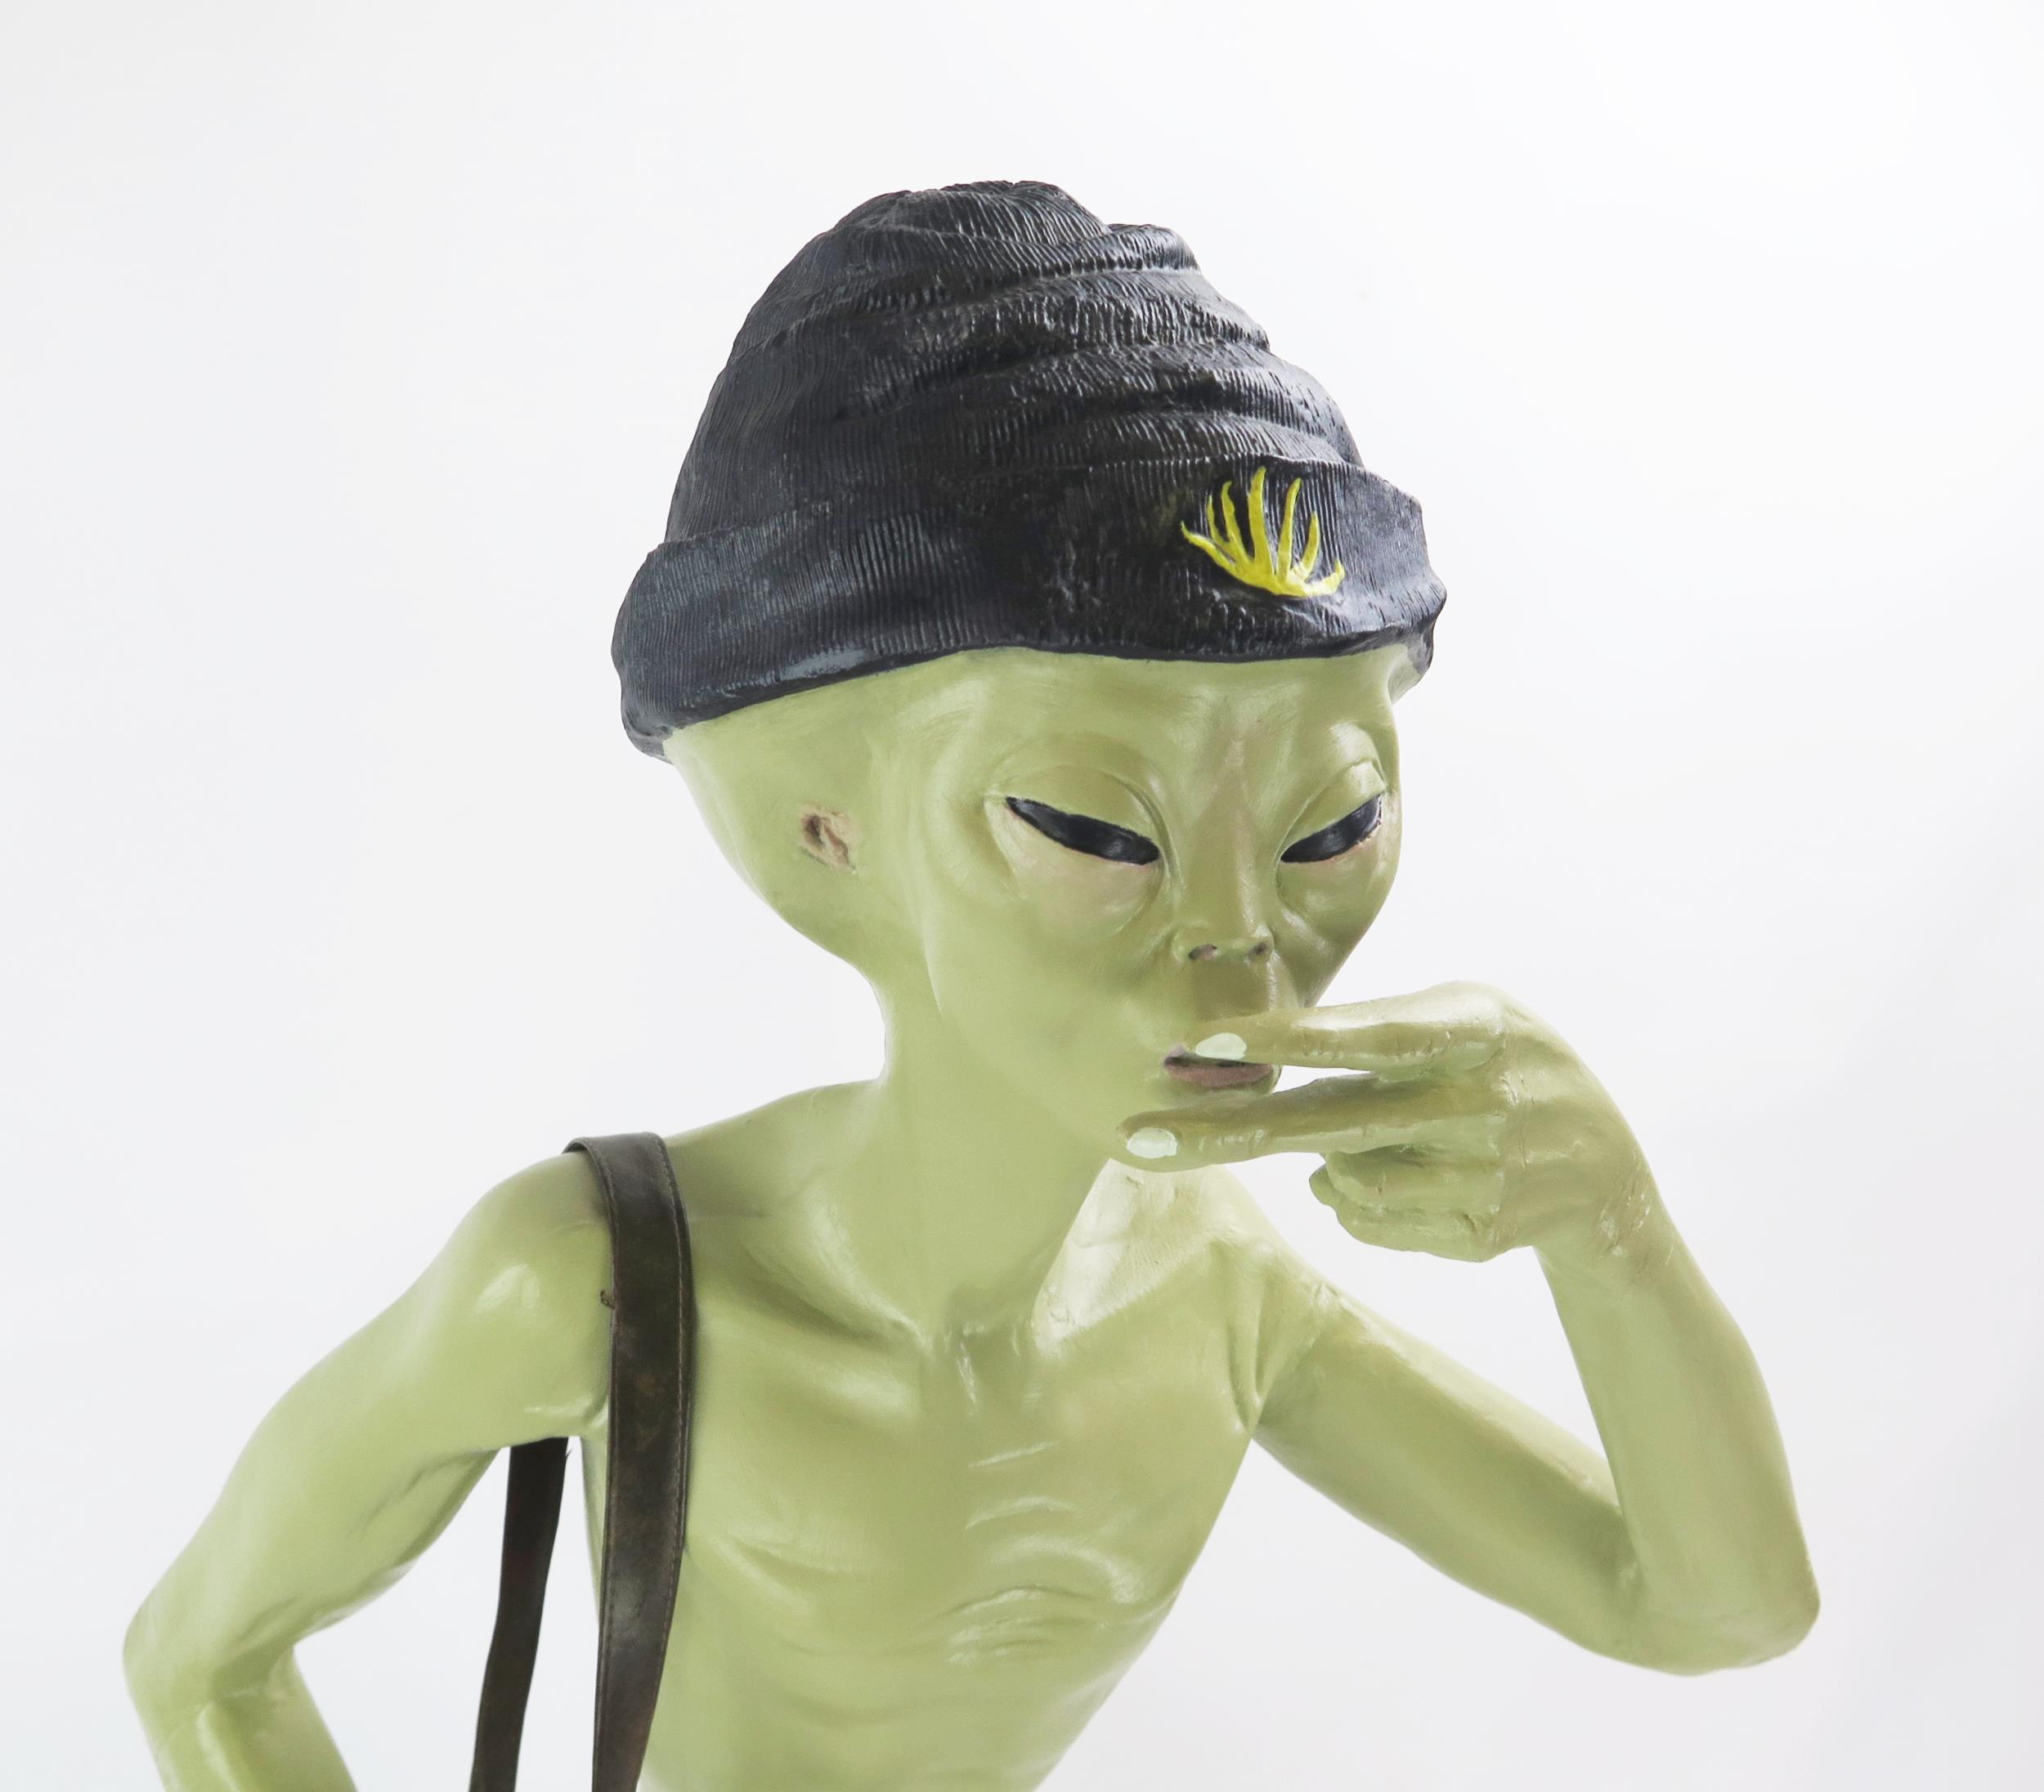 Life Size Alien Resin Figure with shoulder bag and hat decorated with yellow hemp, figures held to - Image 2 of 5